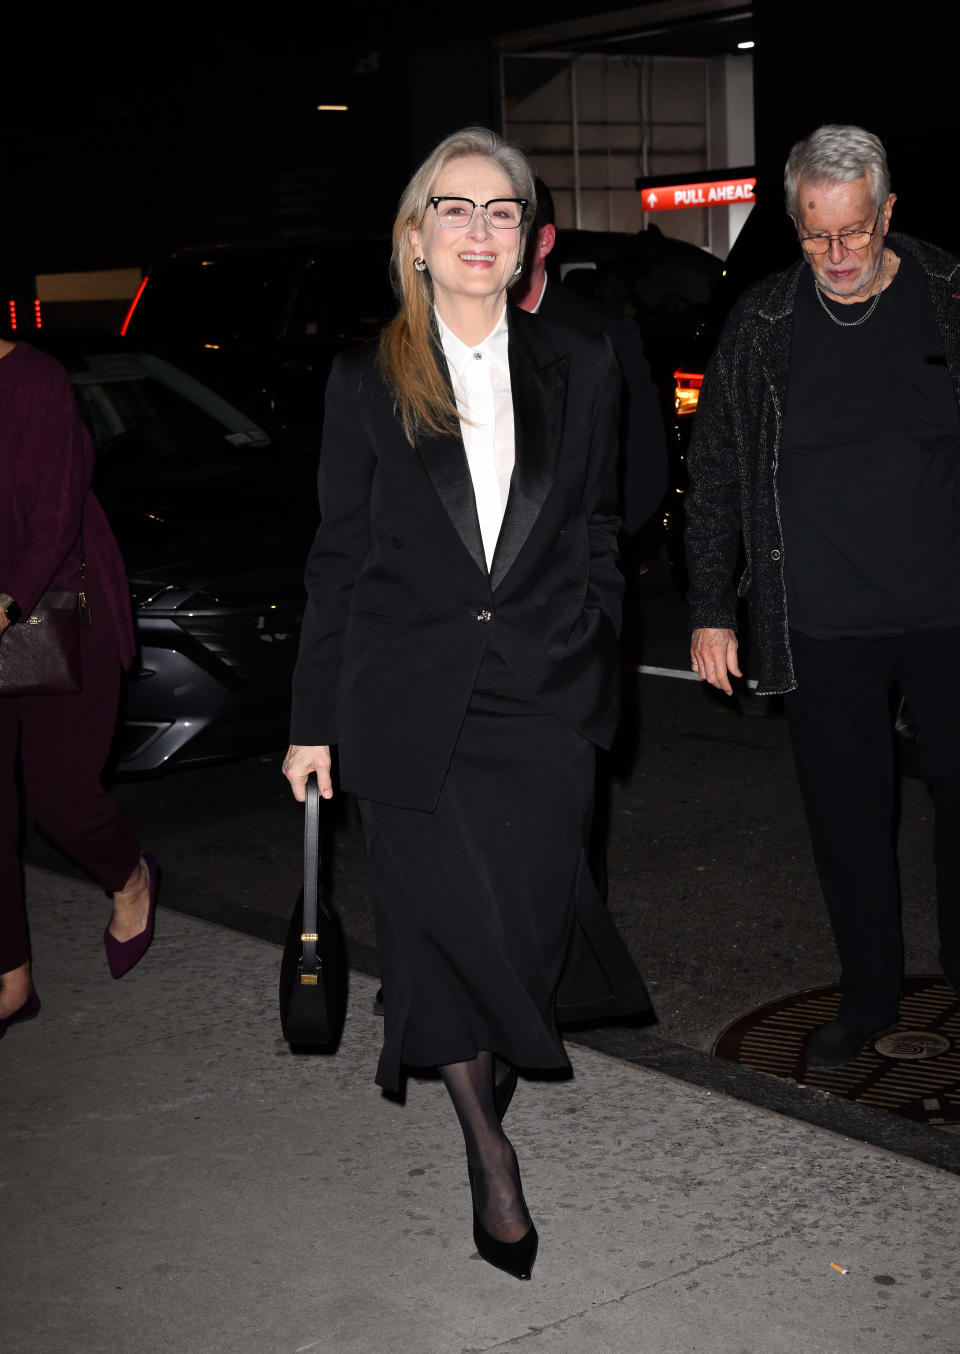 Woman in a black suit with a white shirt, glasses, carrying a purse, walking with a man in a gray sweater